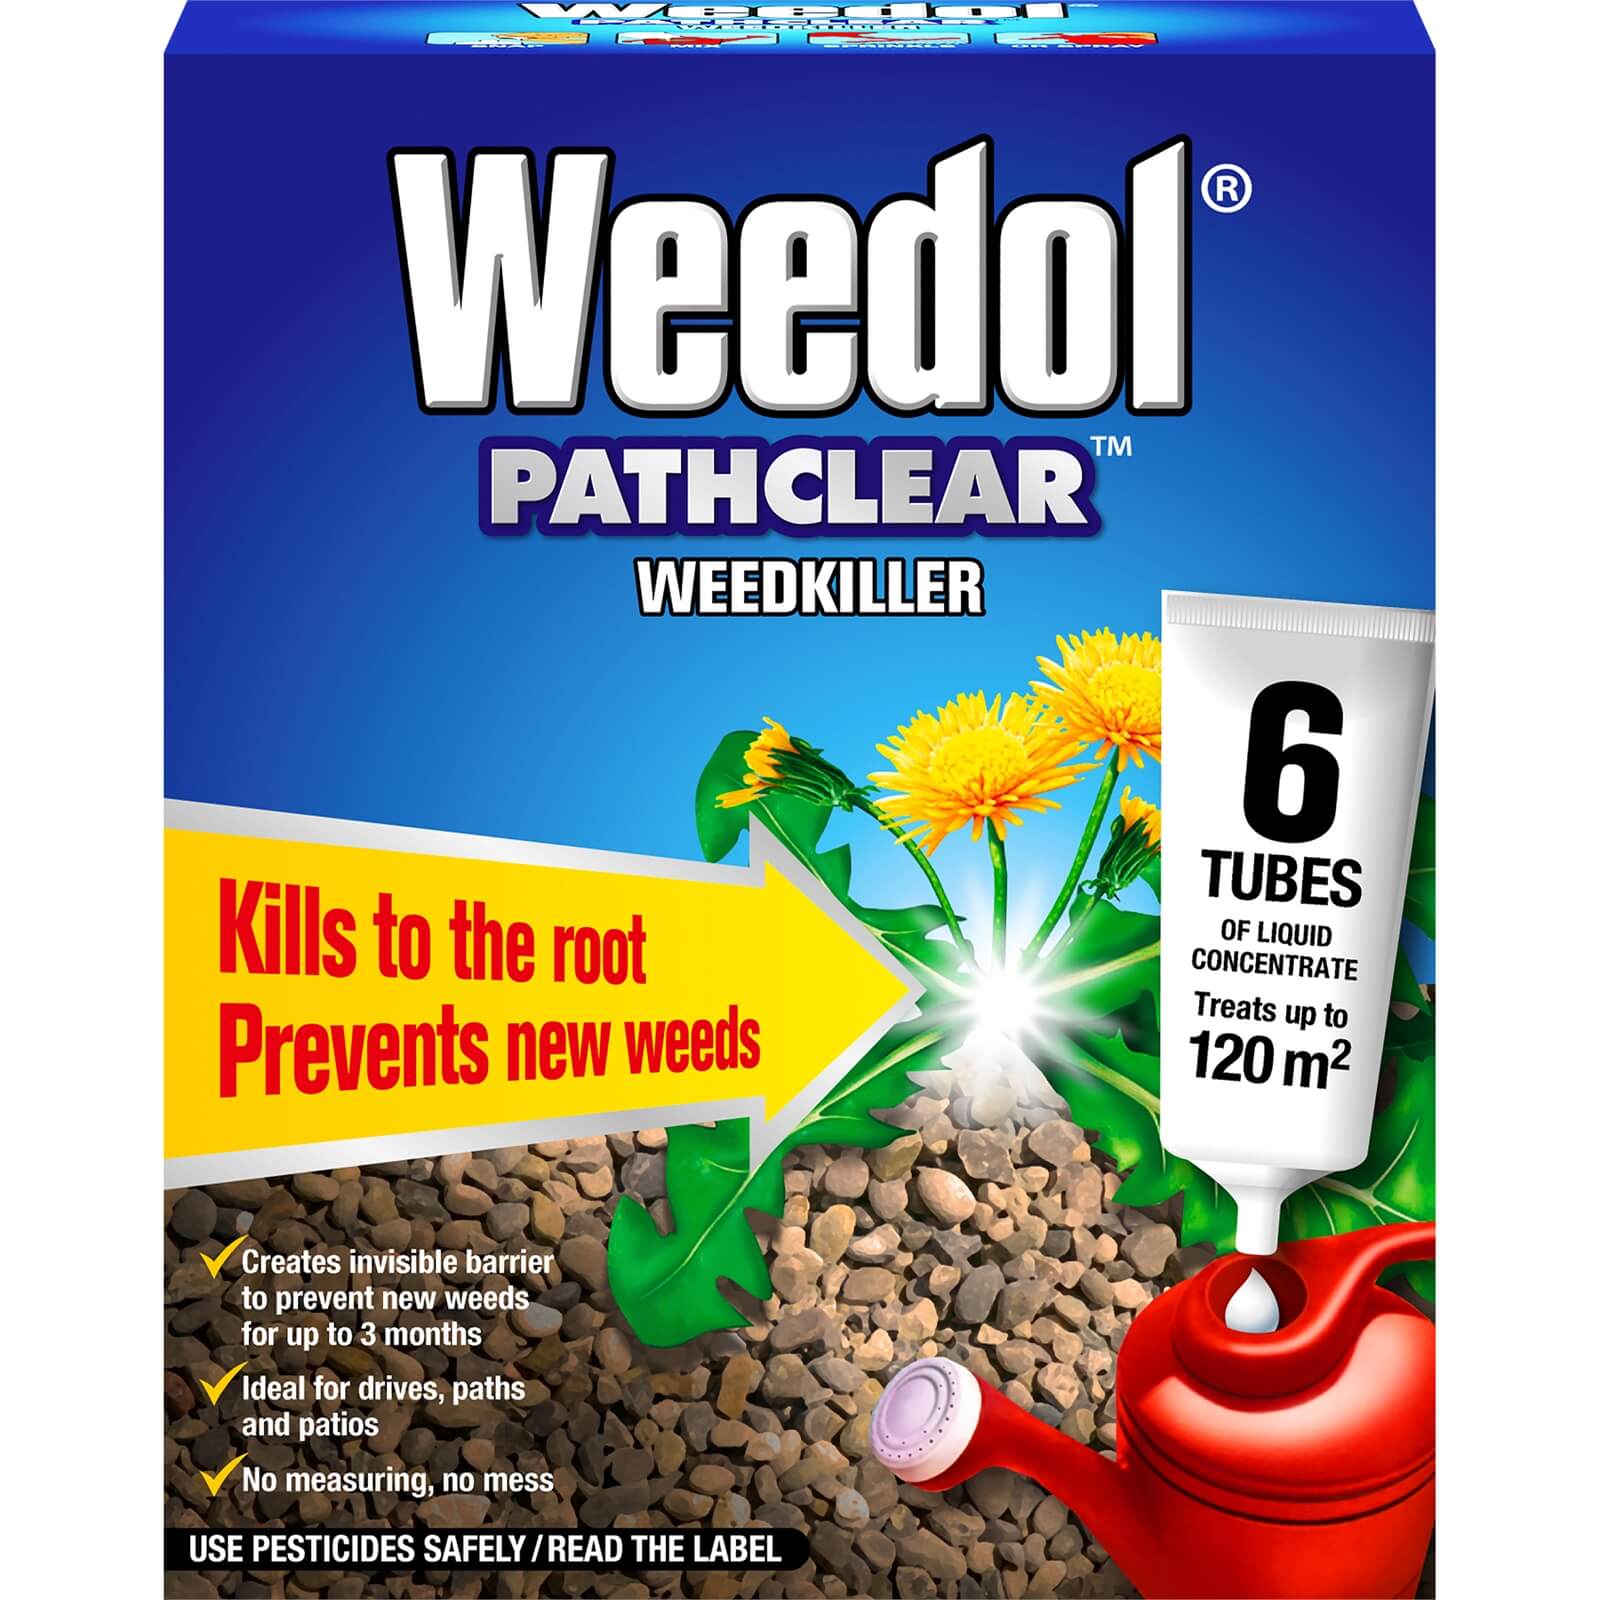 Weedol Pathclear Liquid Concentrate Weedkiller - 6 Tubes